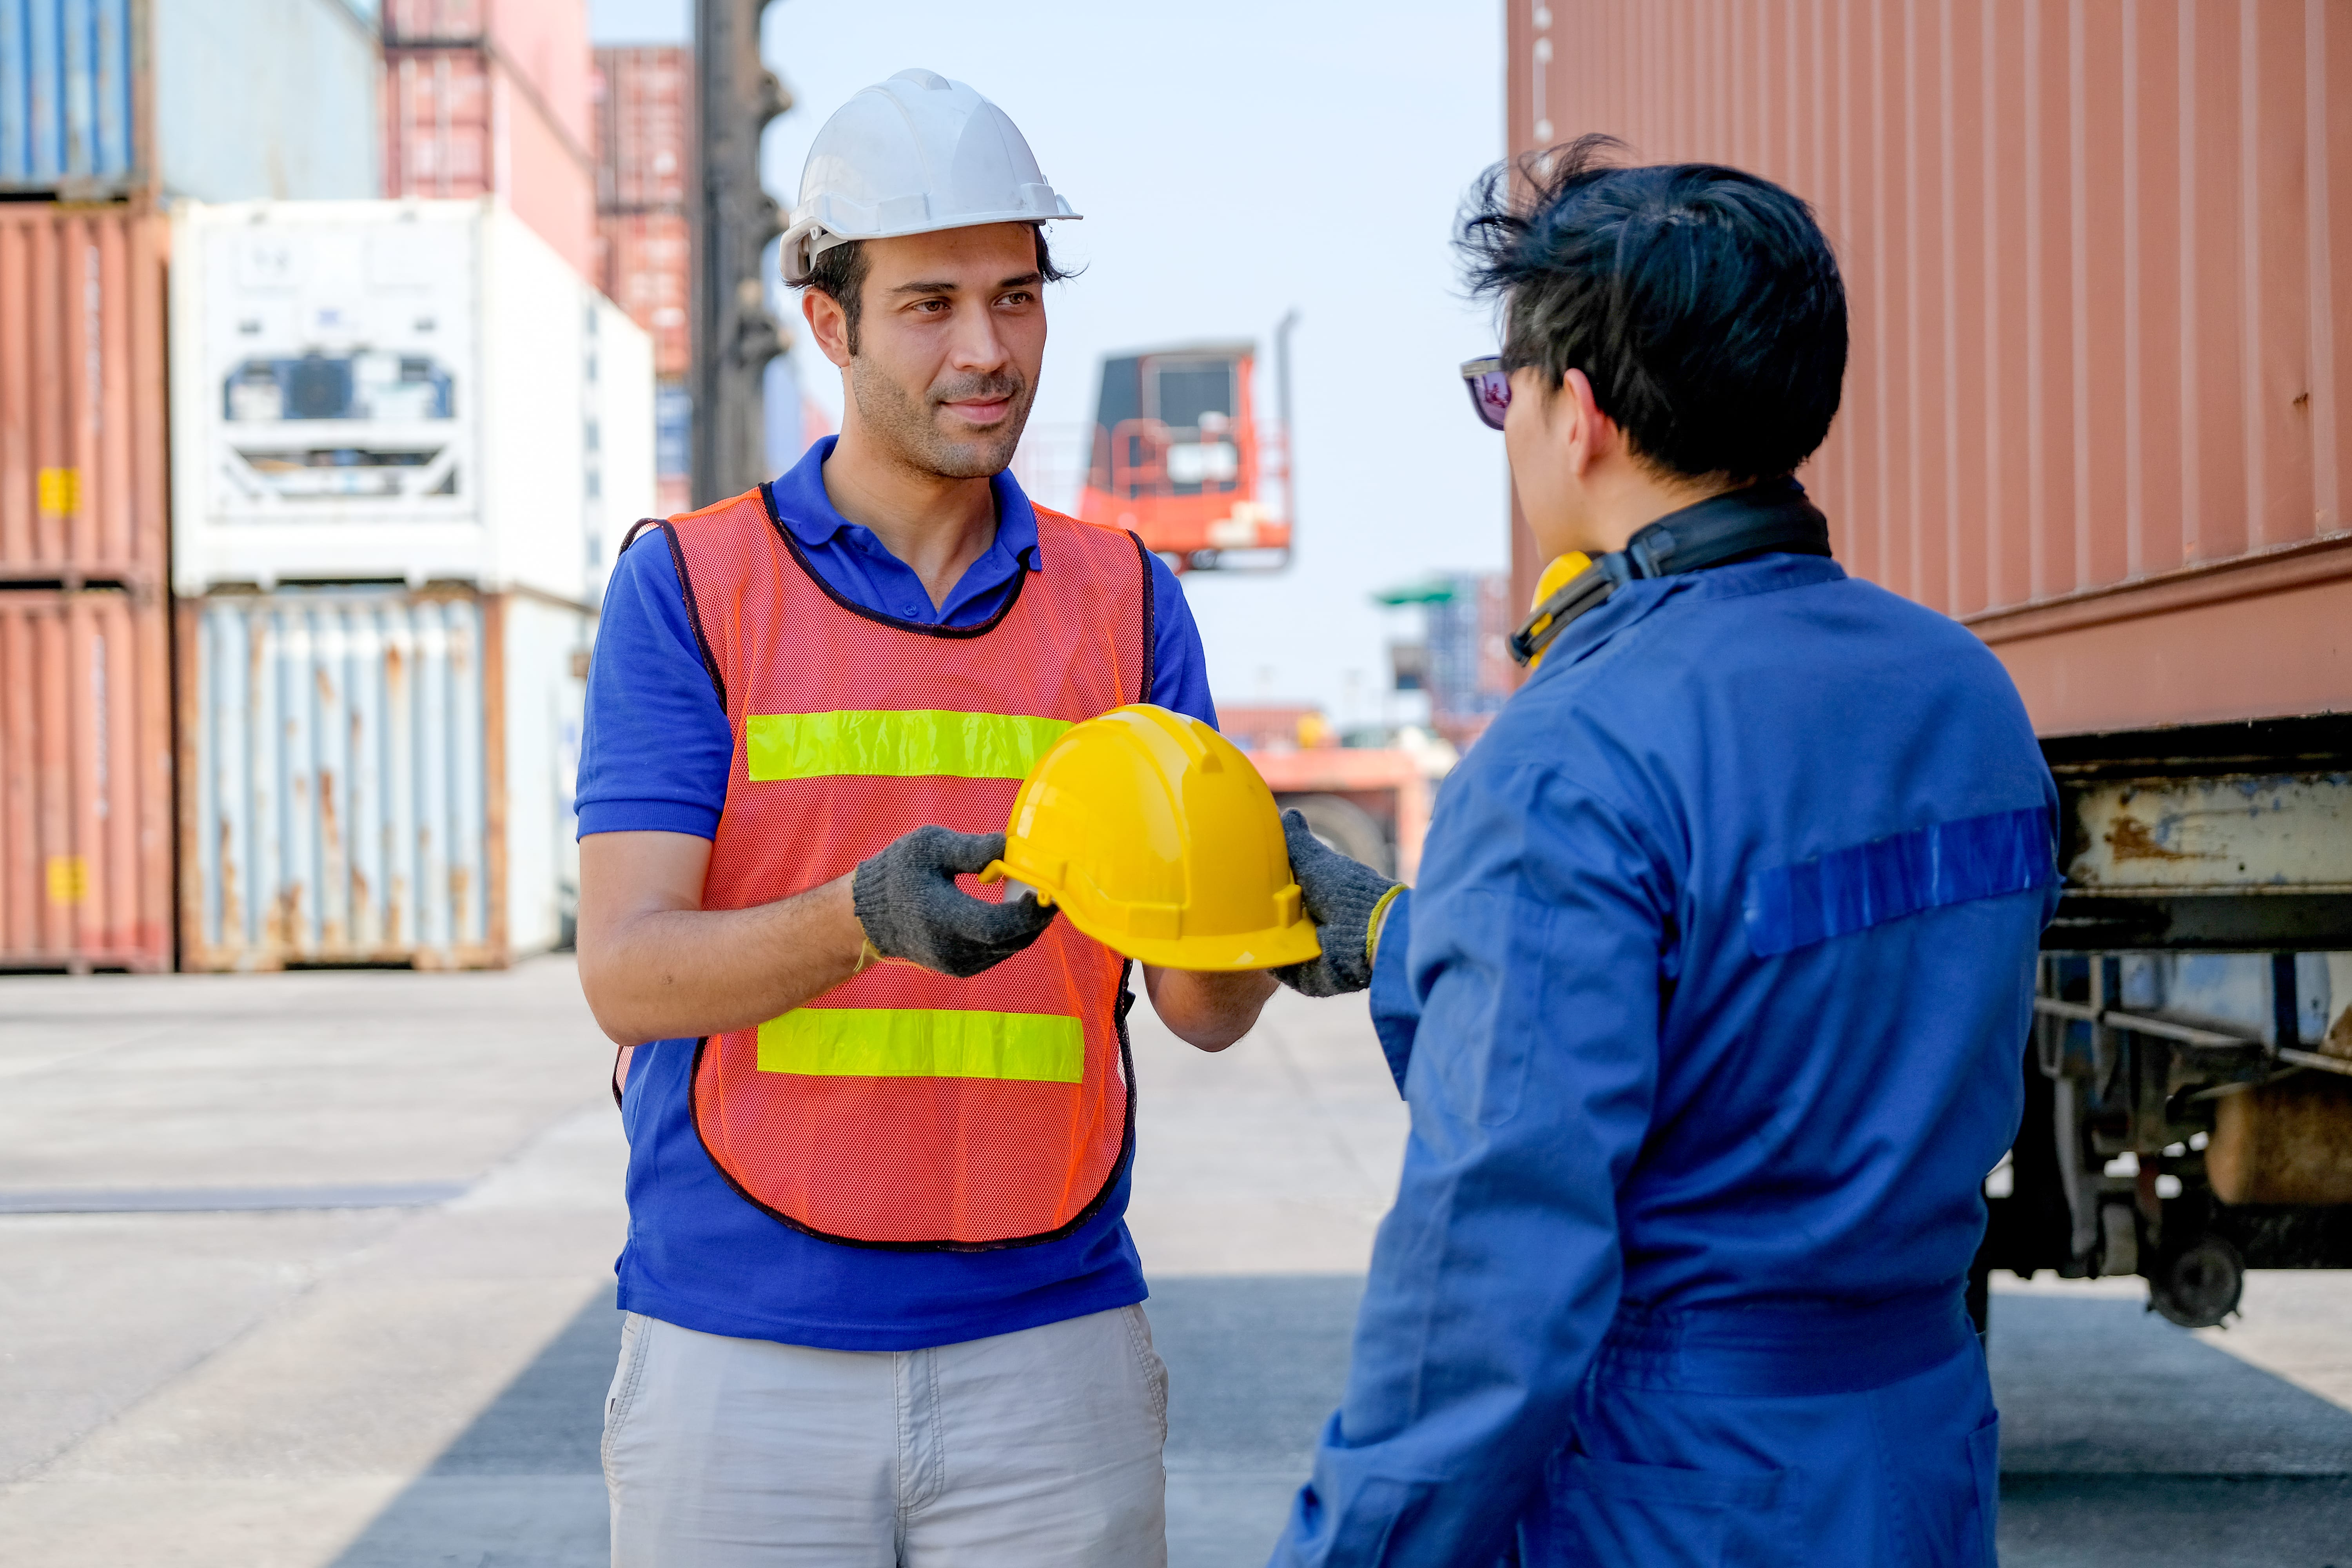 Strengthen Your Workplace Health and Safety Culture